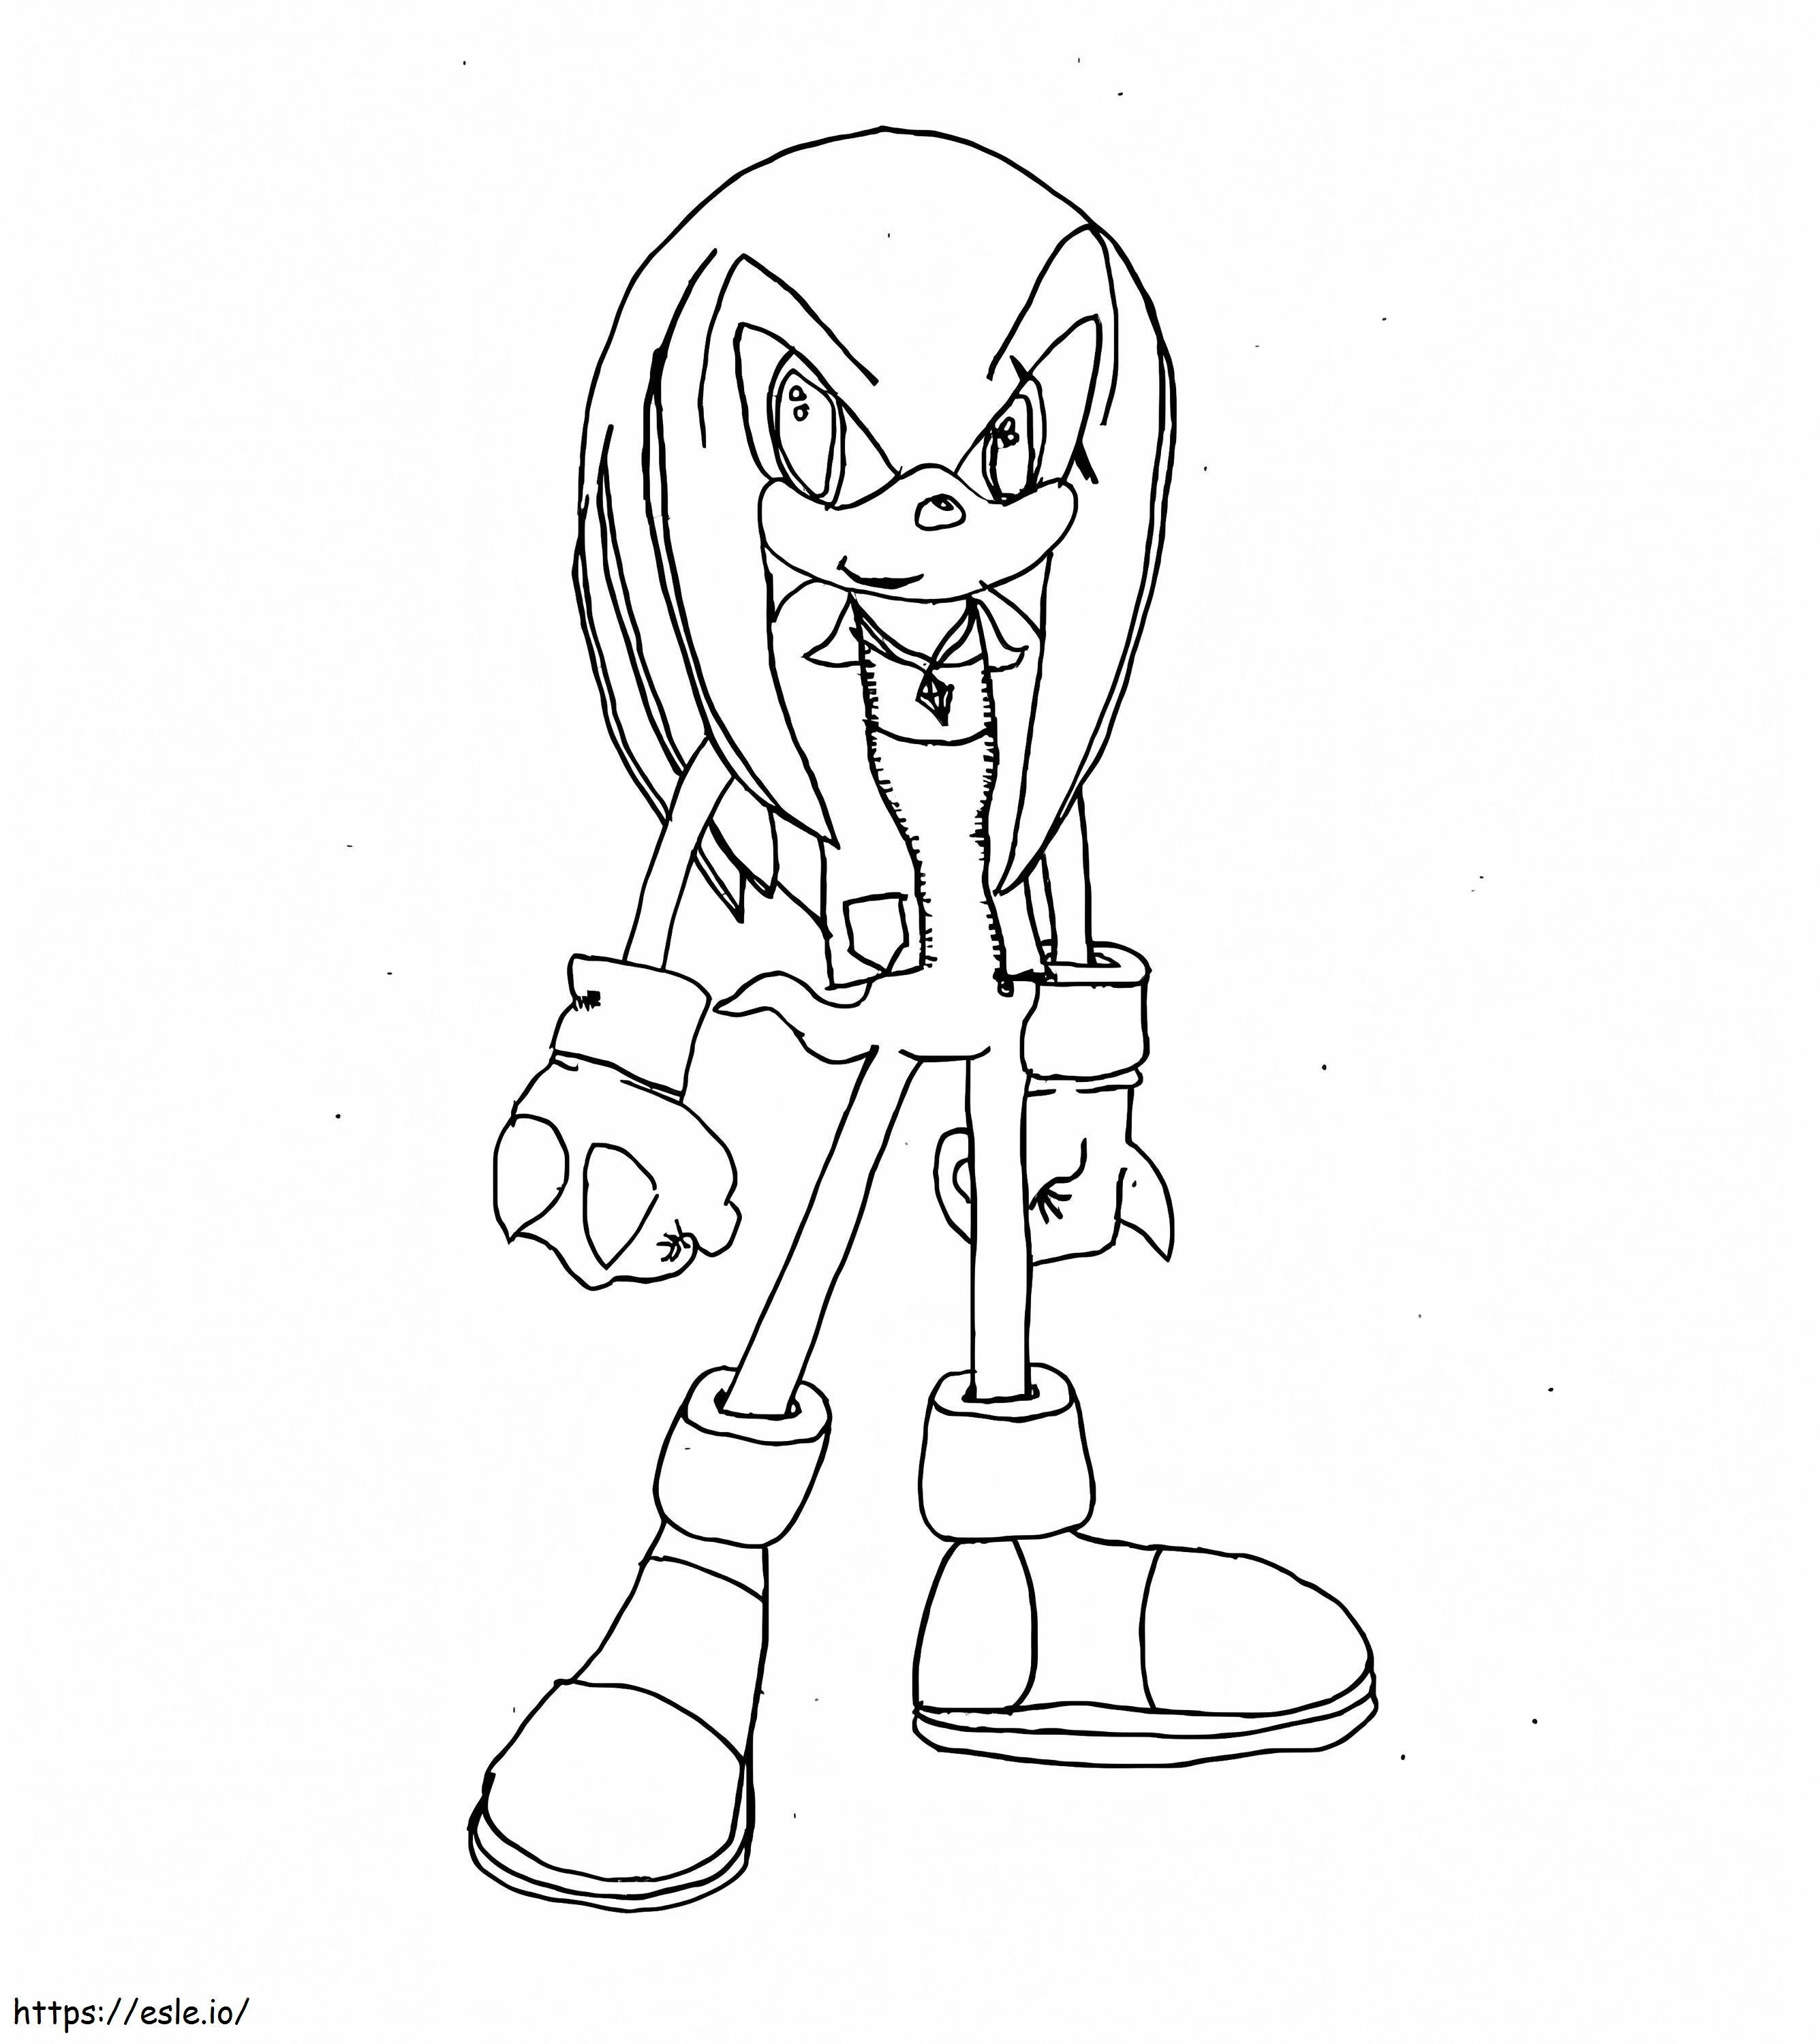 Funny Knuckles The Echidna coloring page